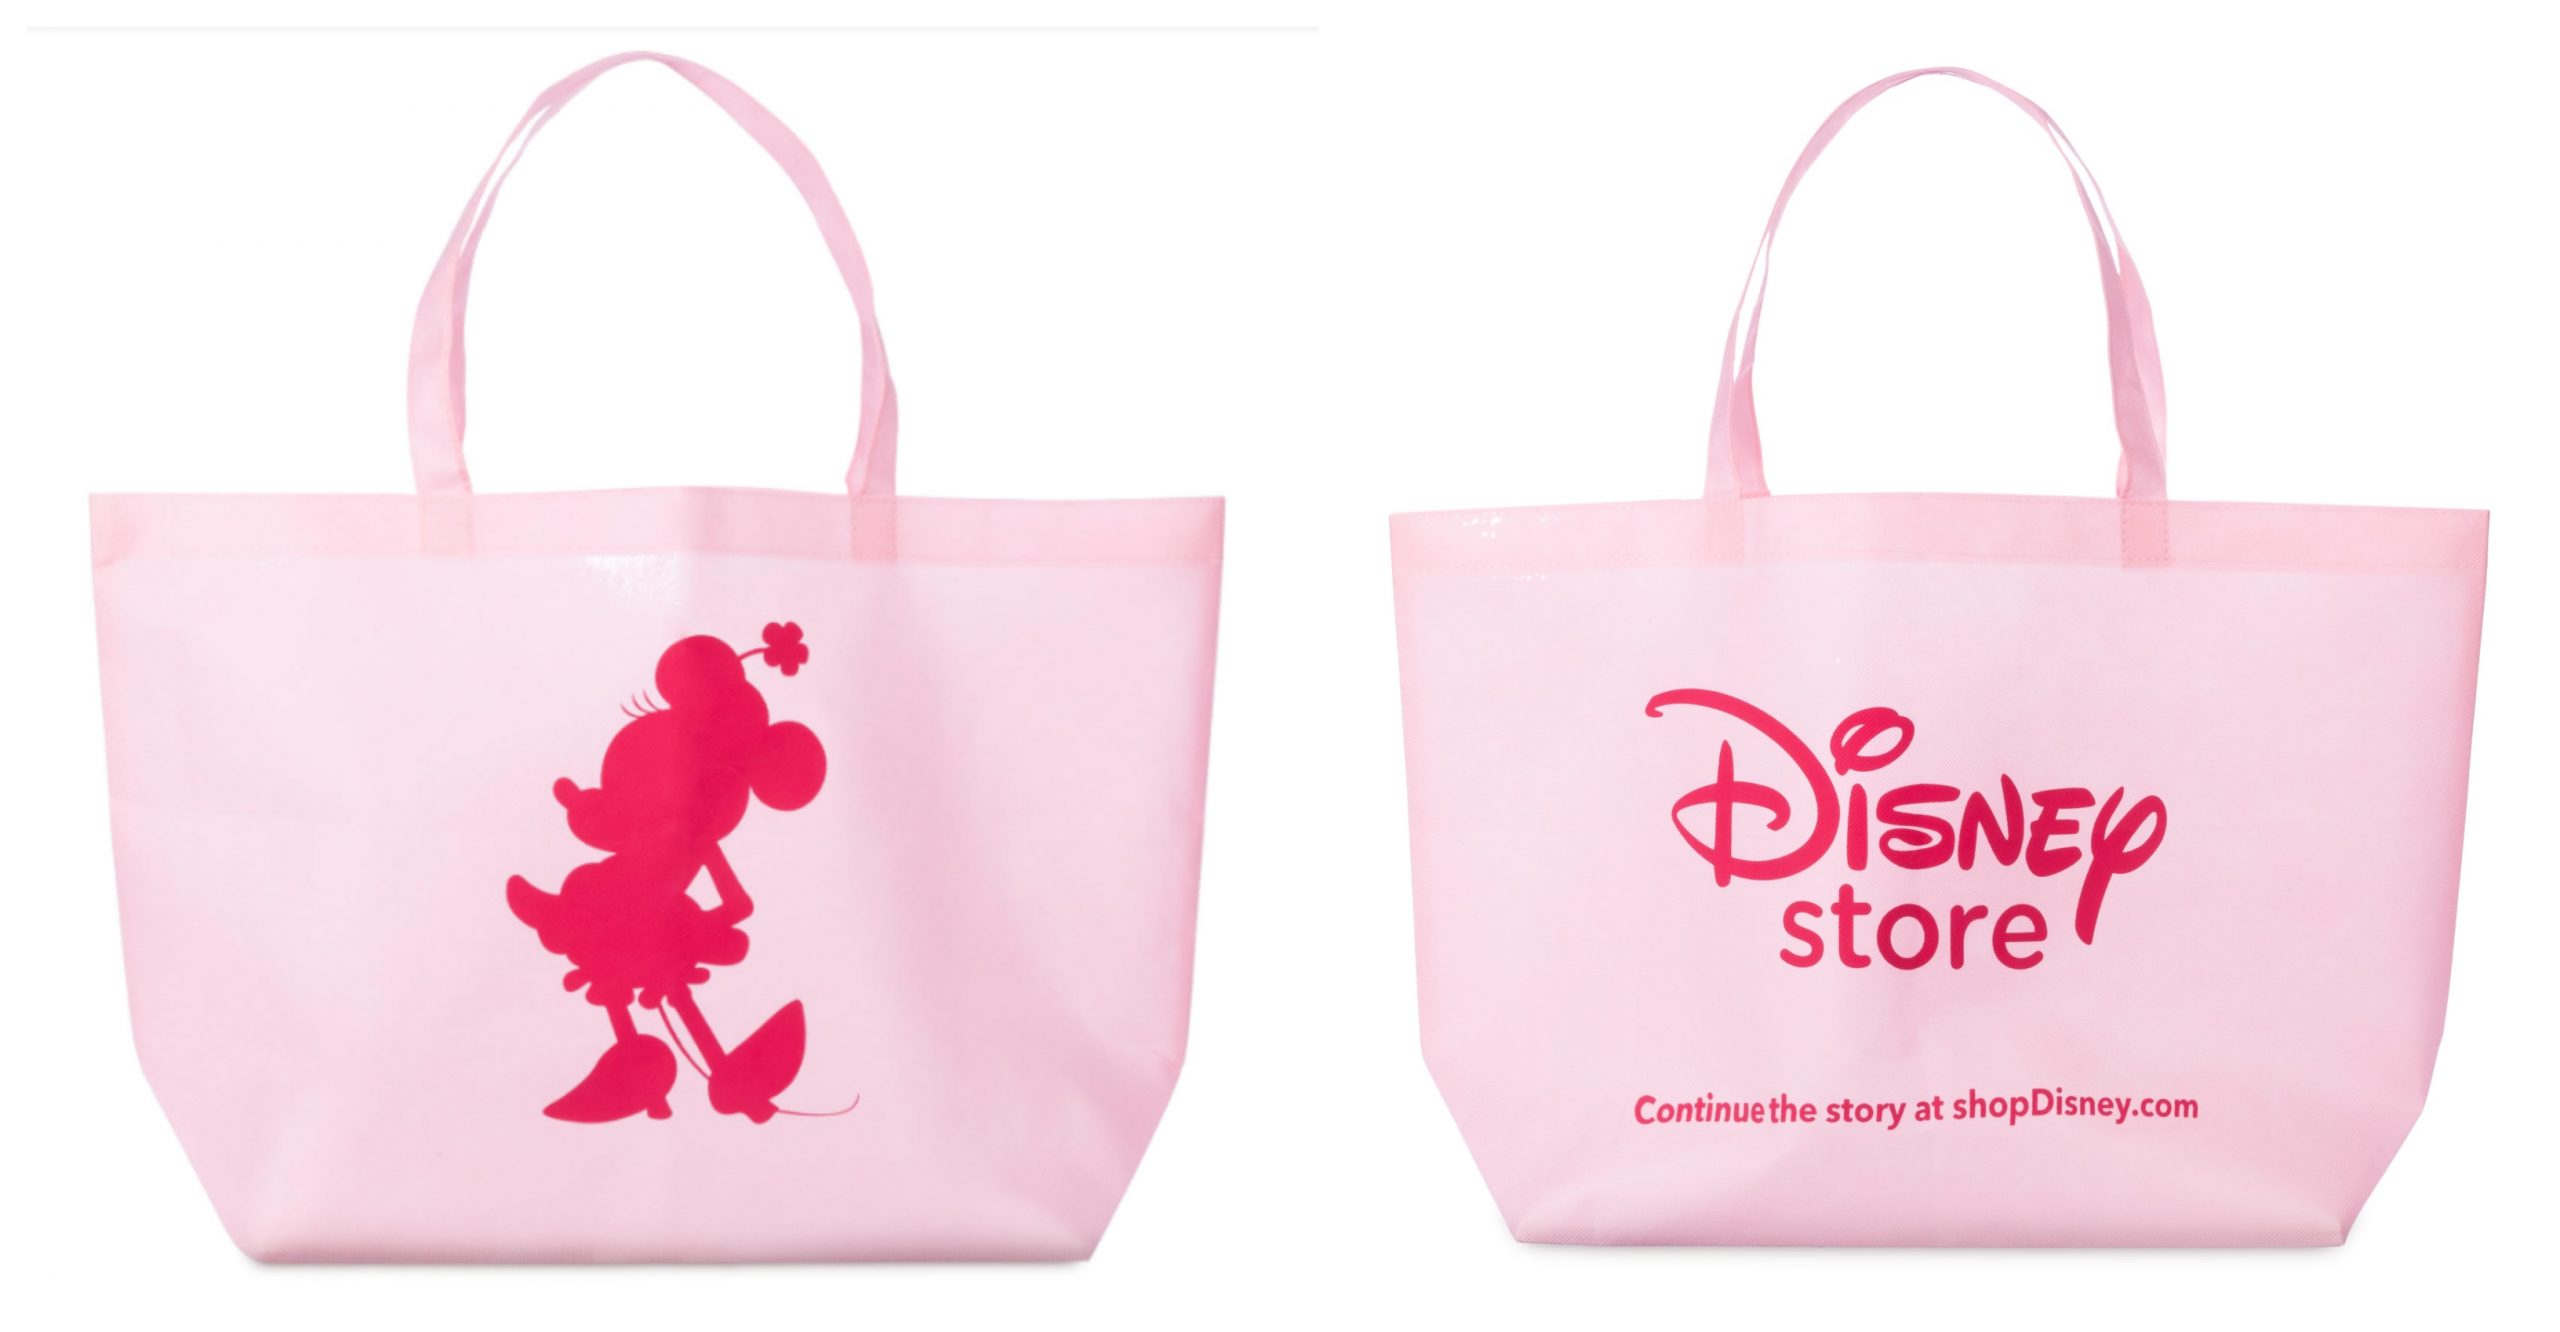 Disney Store Releases New Reusable Bags for Valentine’s Day